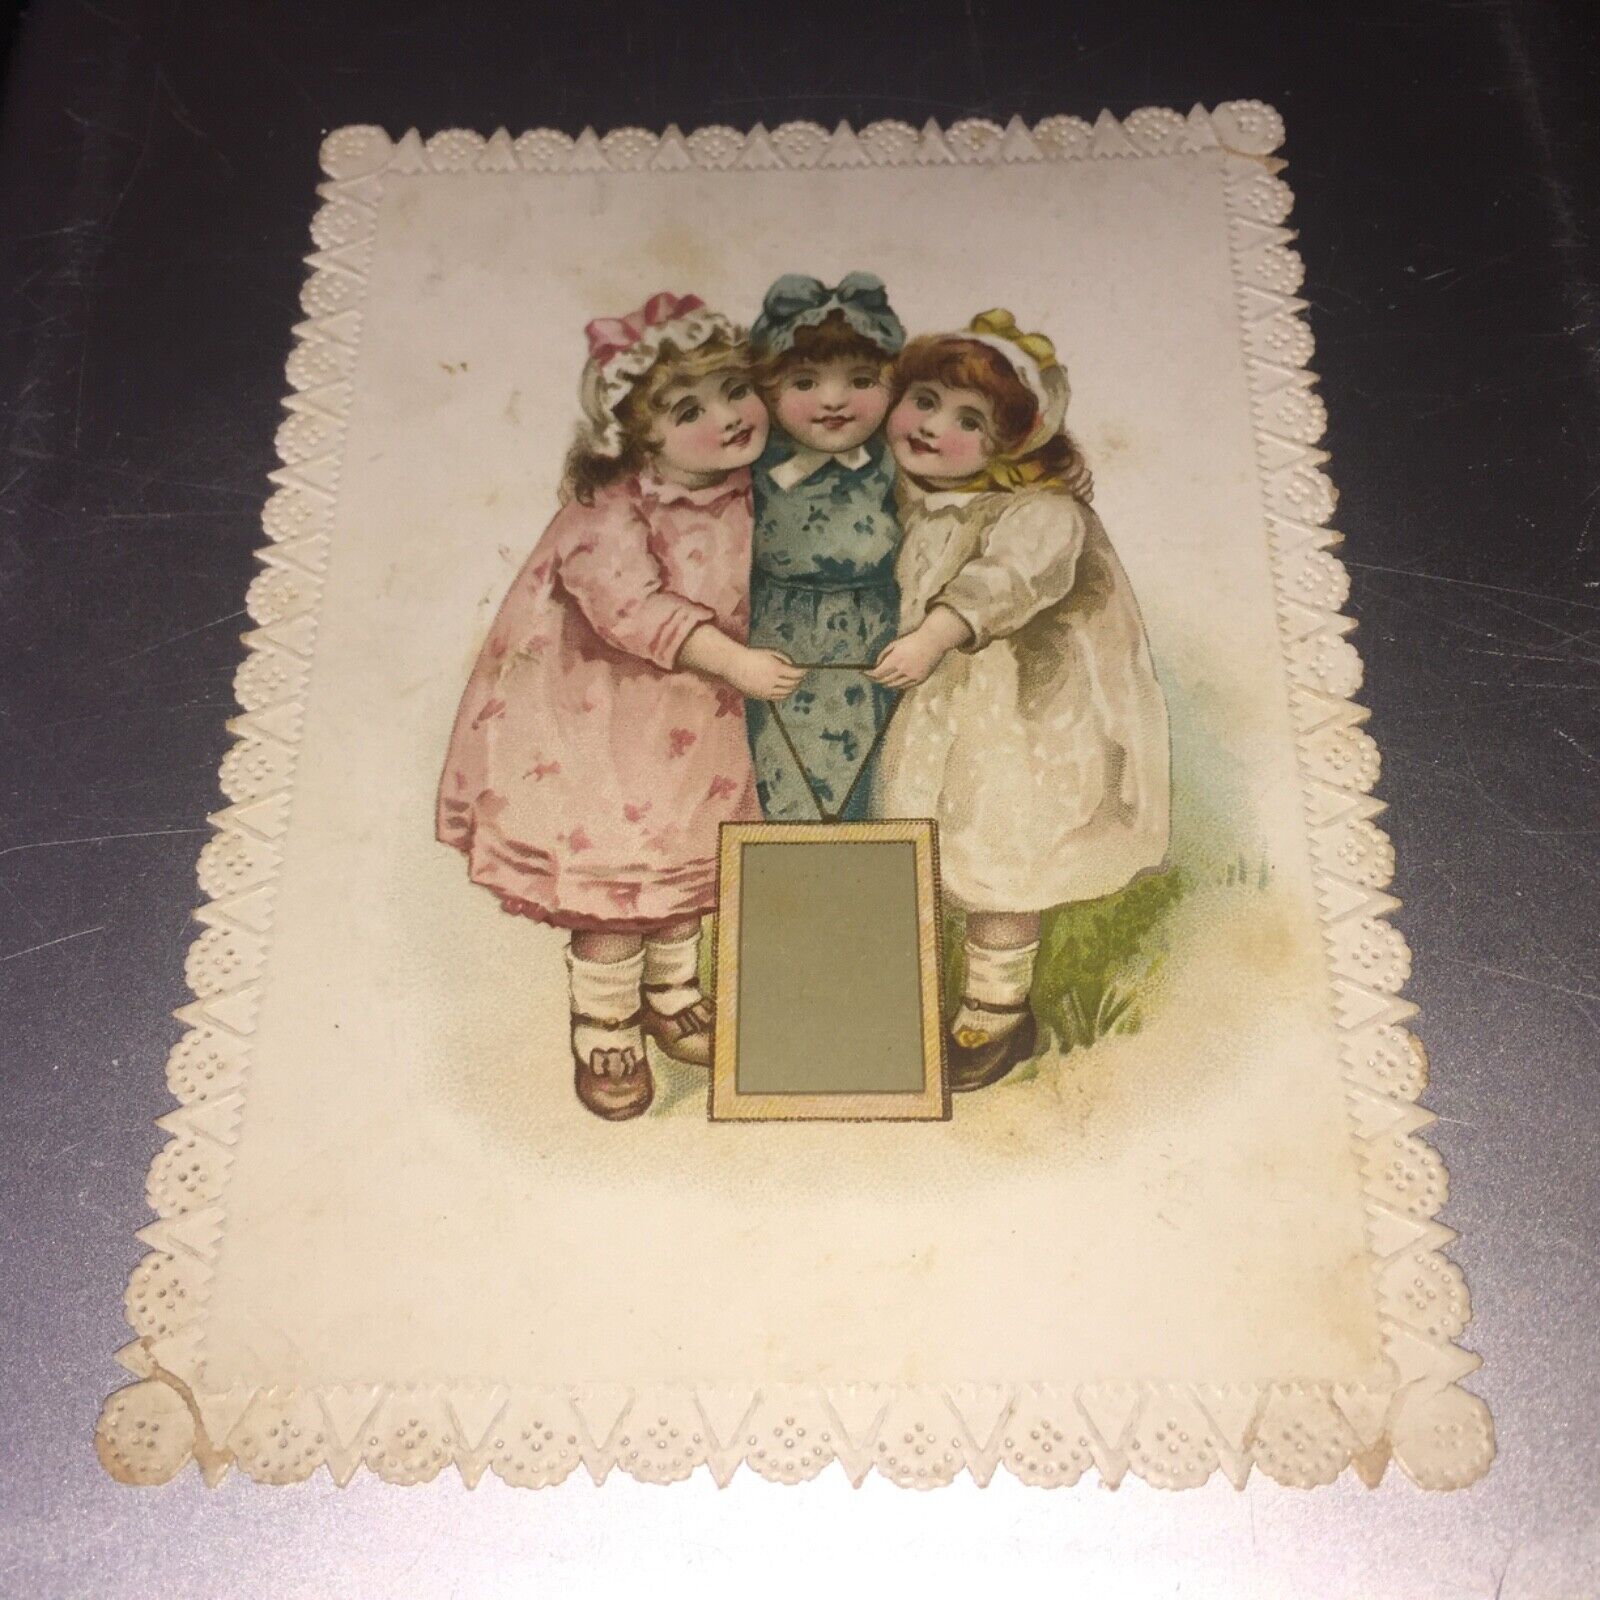 VICTORIAN 3 LITTLE GIRLS HOLDING A PICTURE FRAME CARD